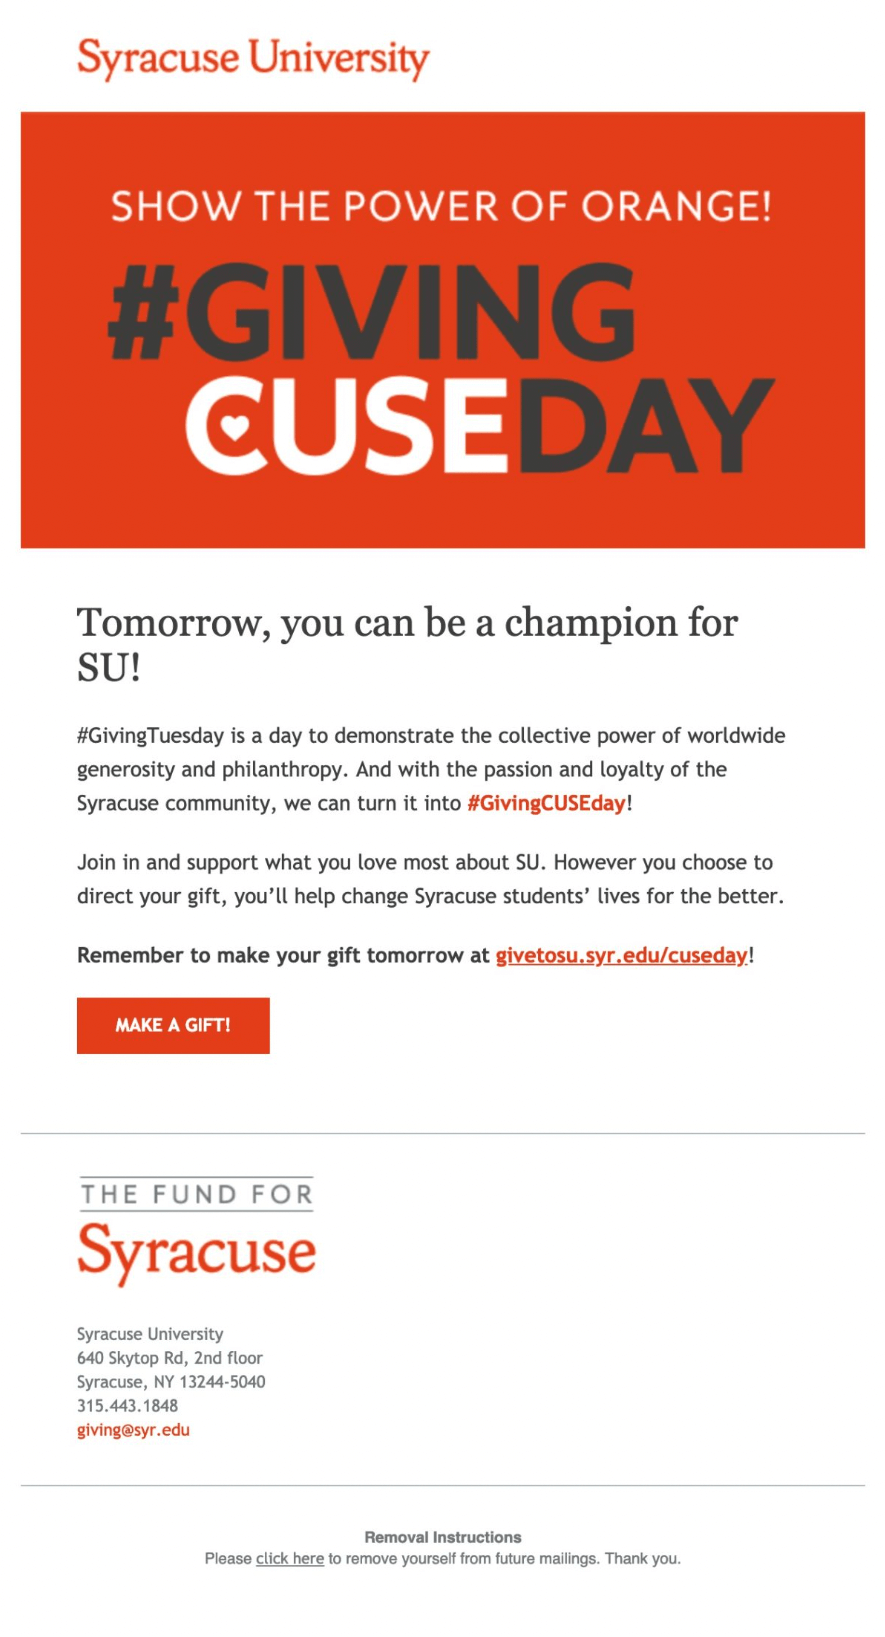 An email from Syracuse University